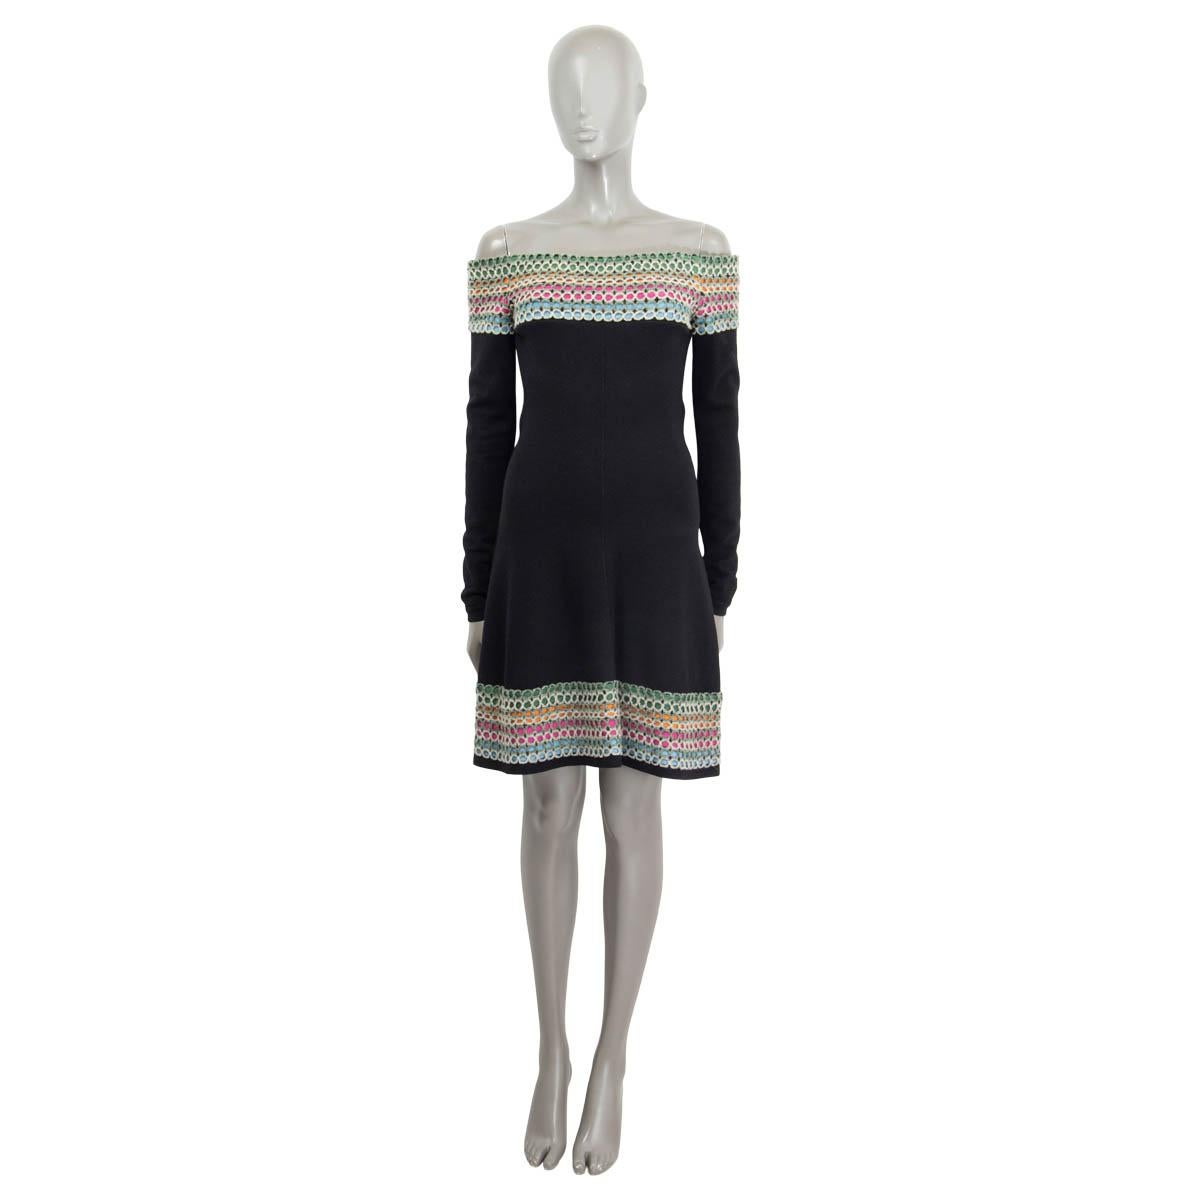 100% authentic Alaïa off-shoulder dress in black wool and polyamide (missing tag). Opens with a black zipper in the back and features knit details in pink, light blue, green, and orange. Has a flared cut on the hips and long black sleeves with knit